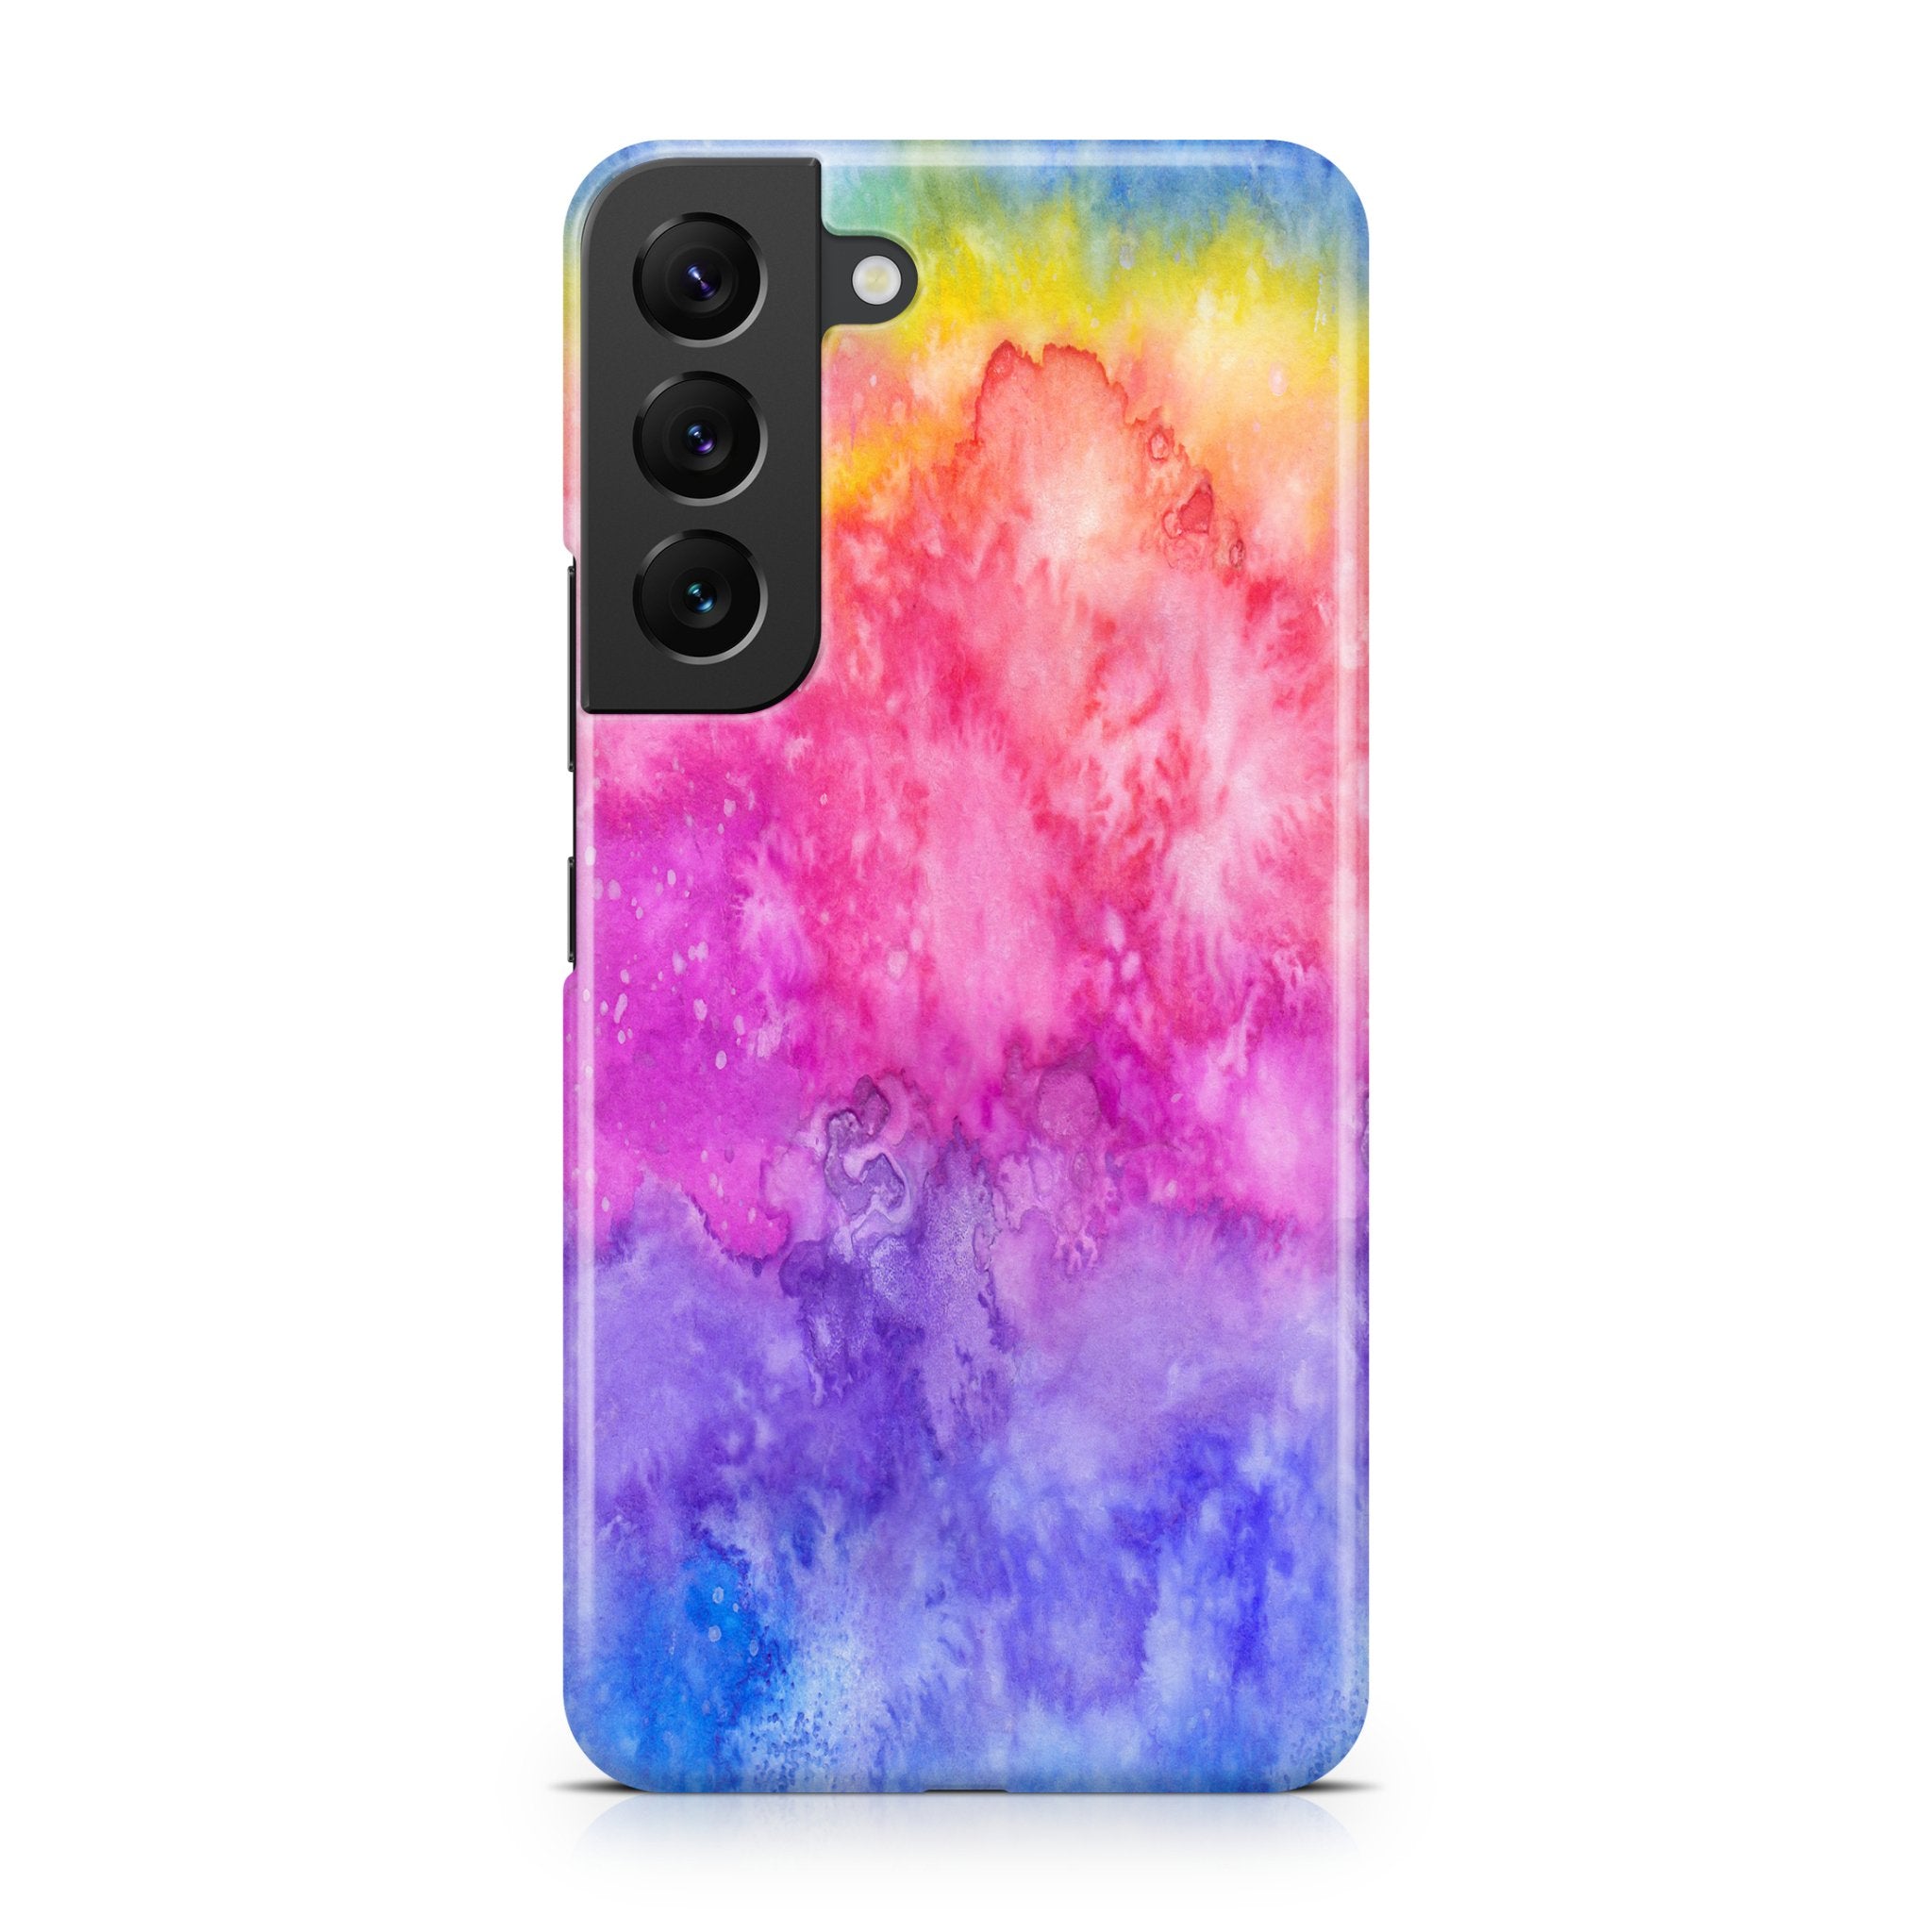 Watercolor Splash - Samsung phone case designs by CaseSwagger